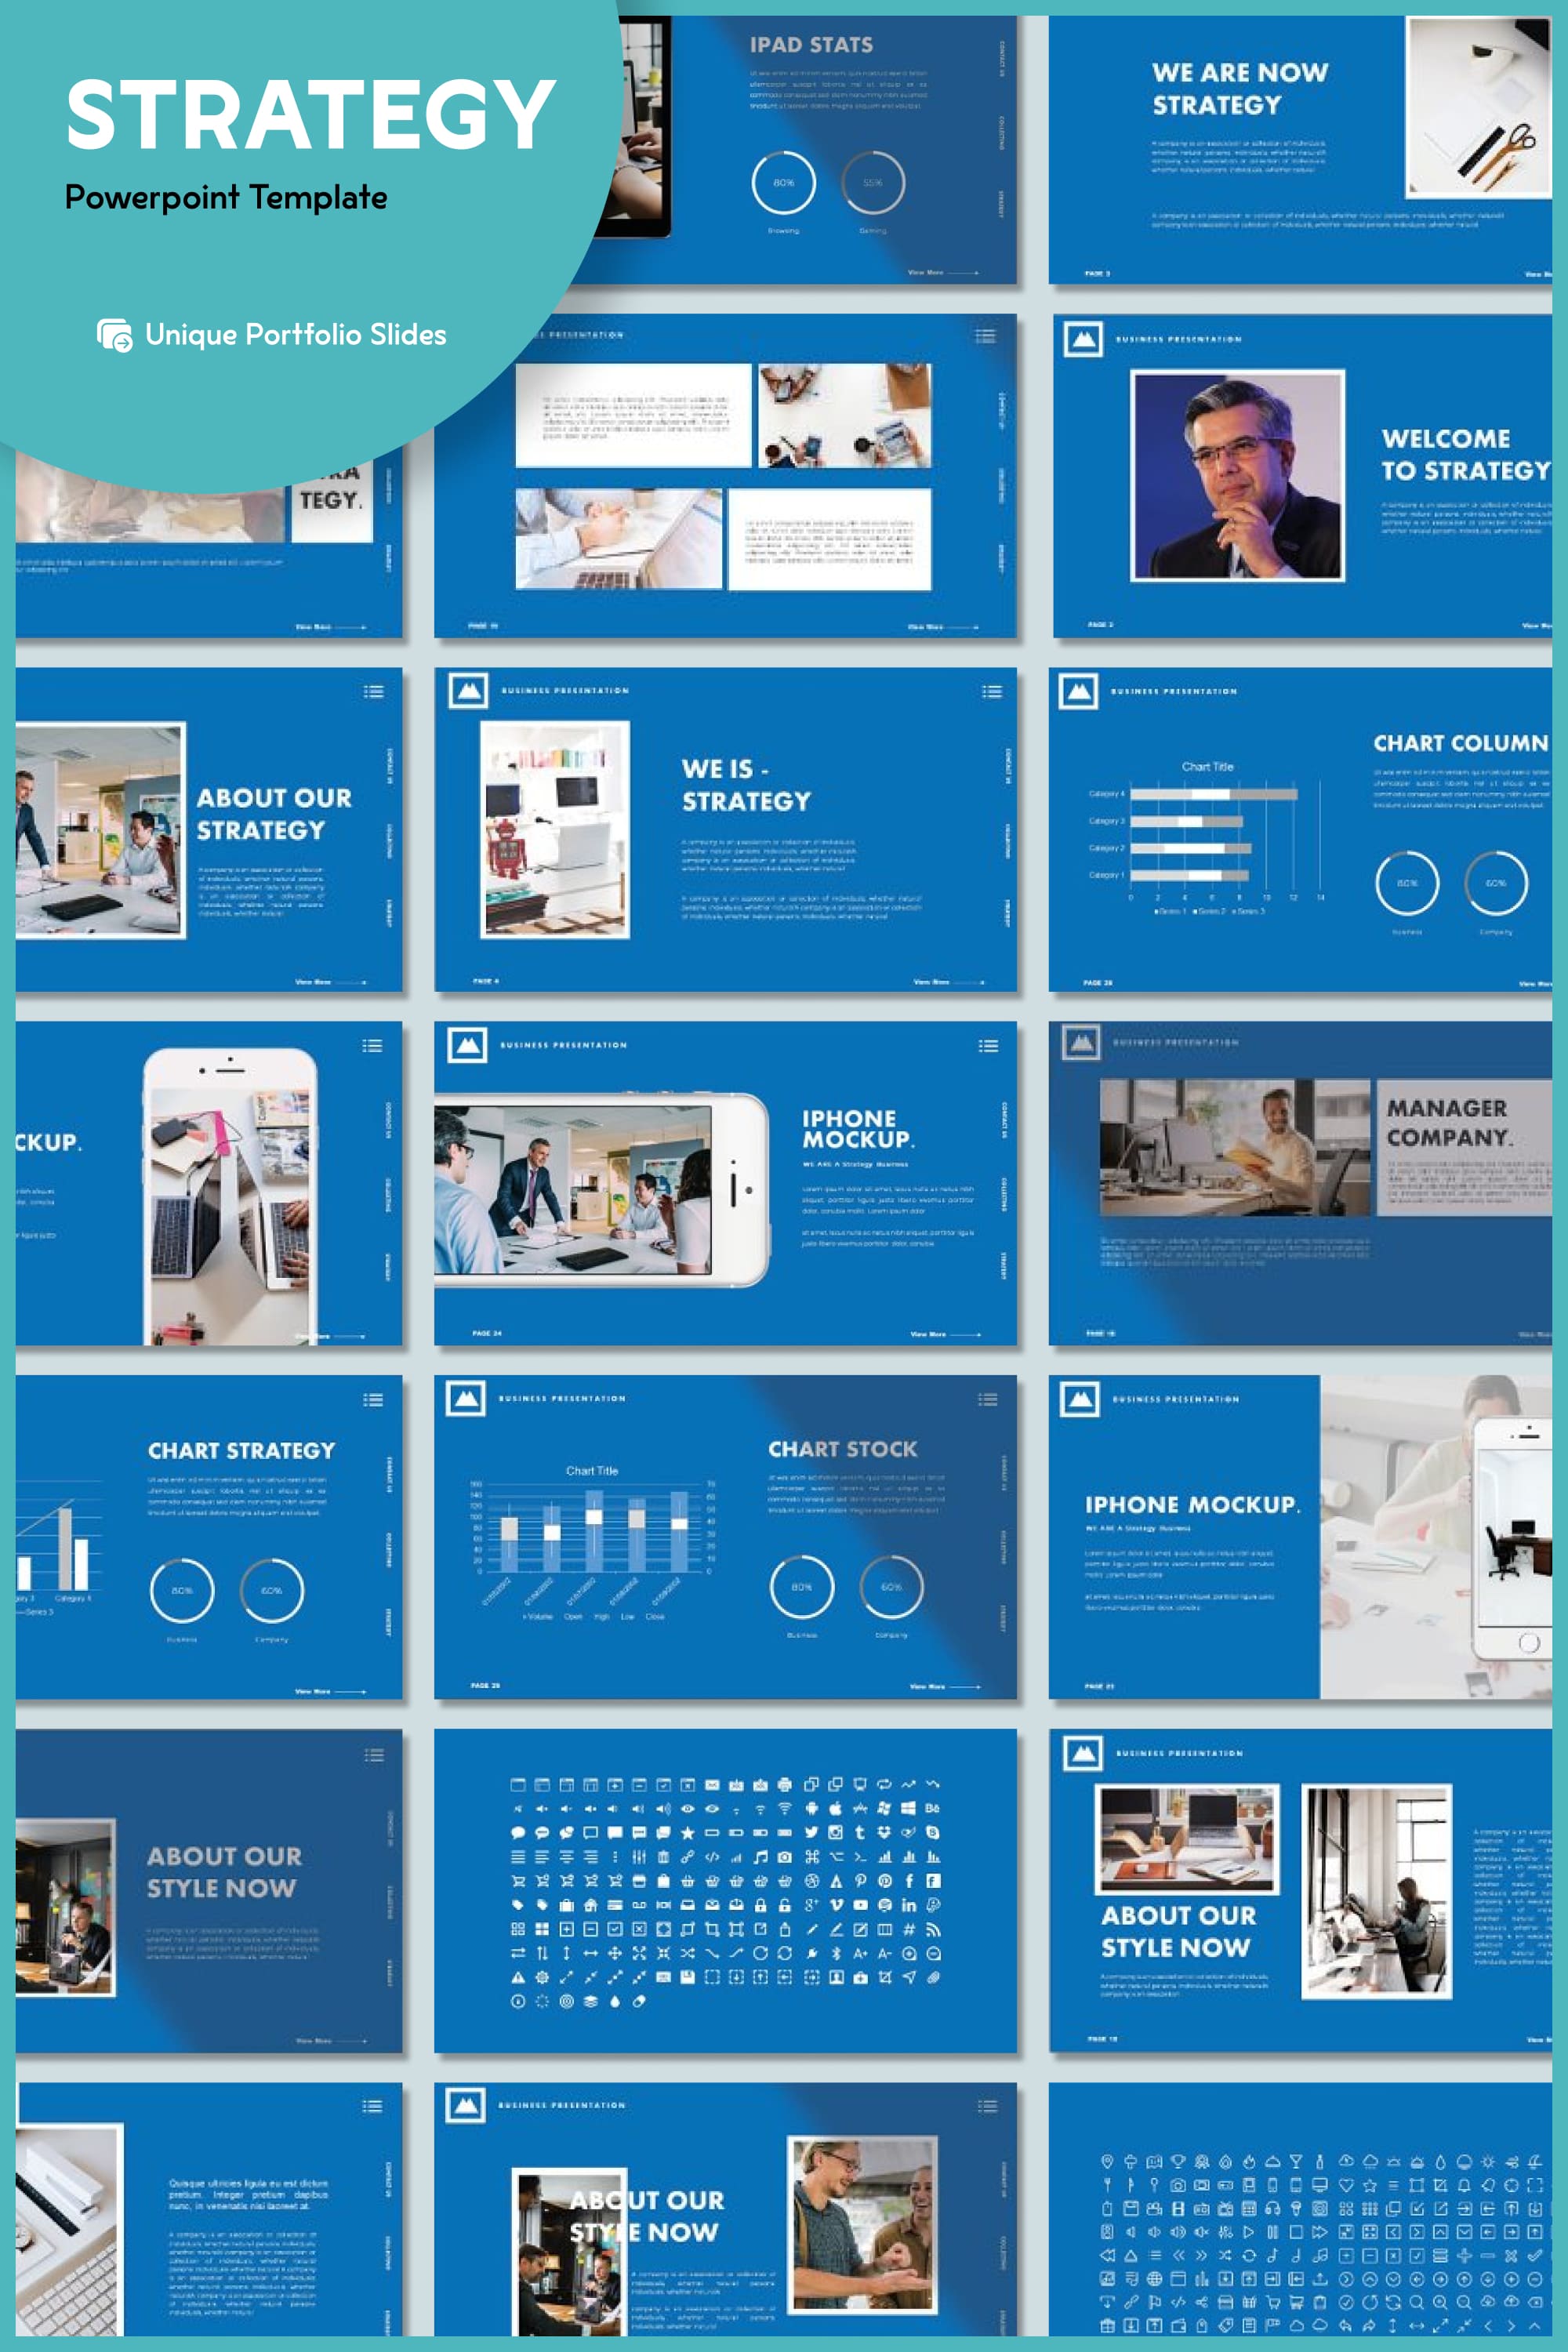 Strategy powerpoint template - pinterest image preview.